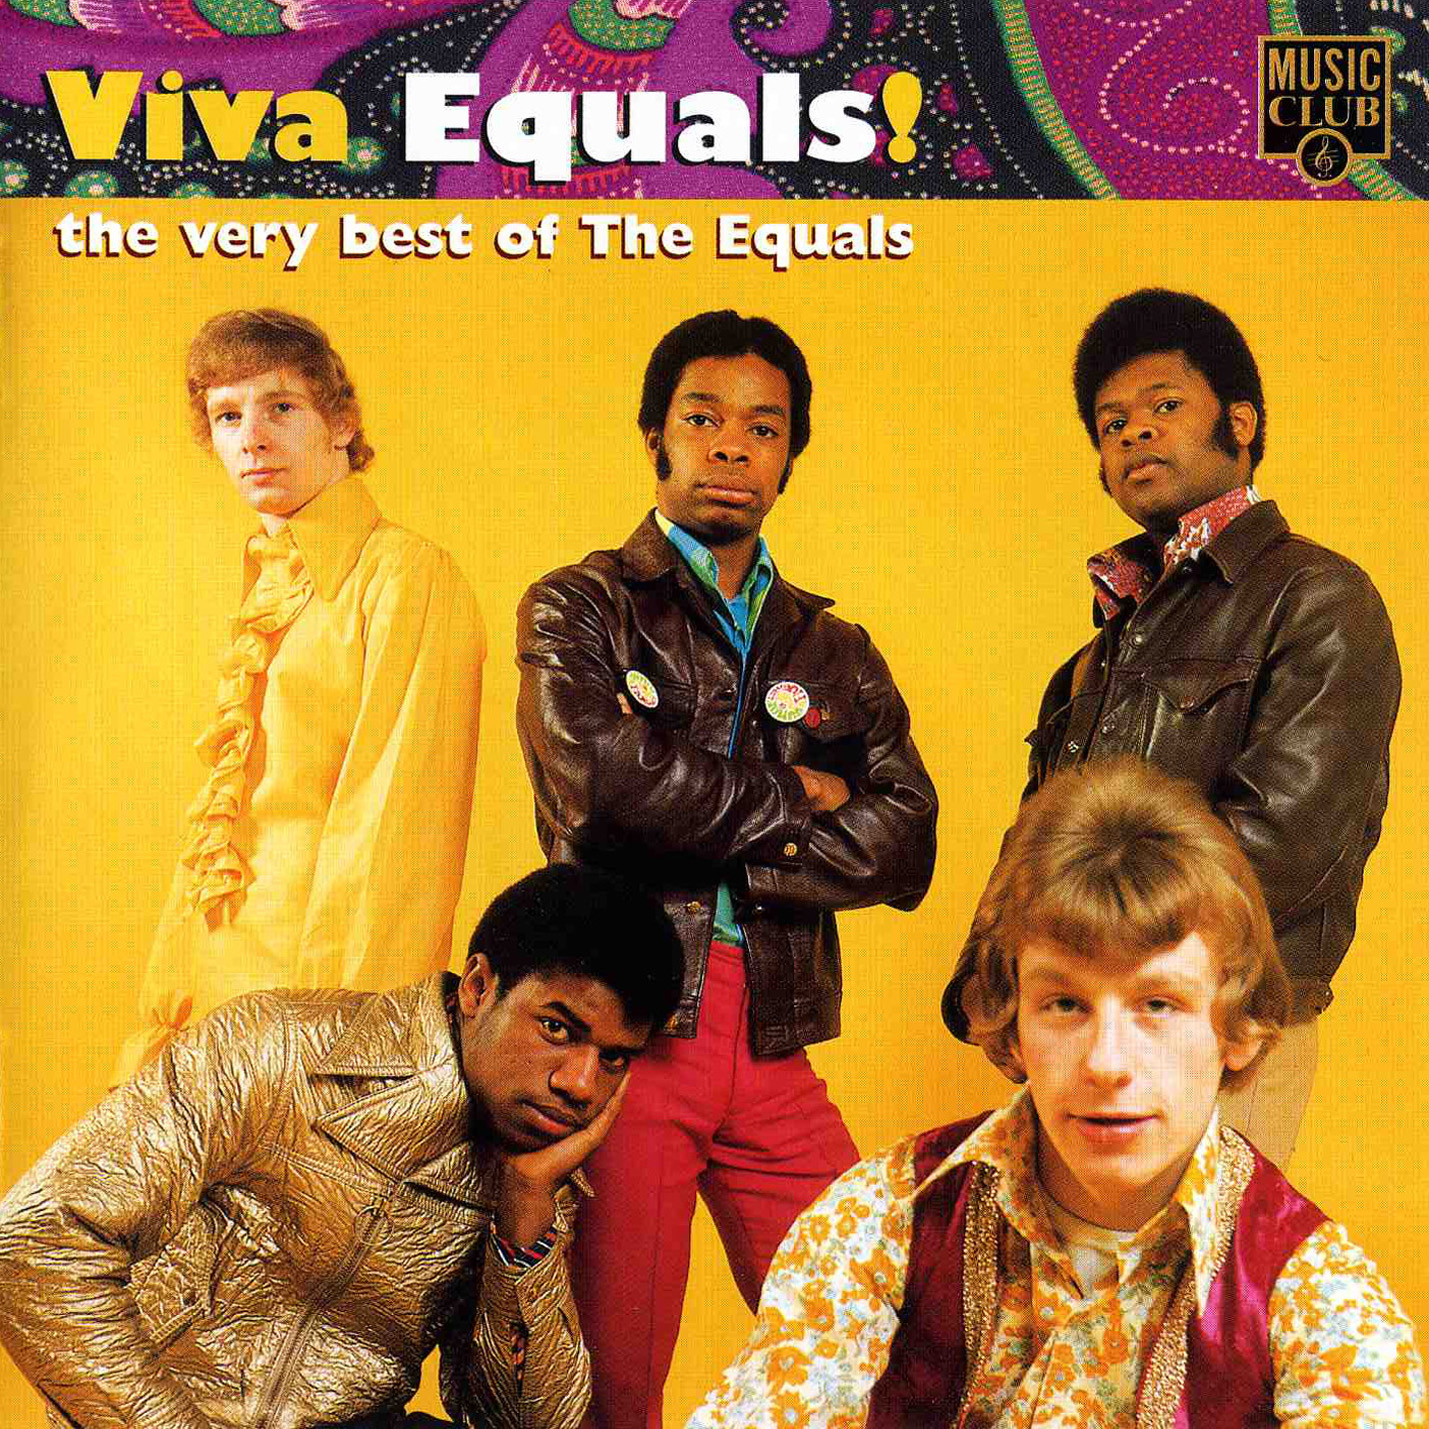 The Equals - The Very Best of The Equals in DTS-wav (DE ORIGINEL TRACKS)